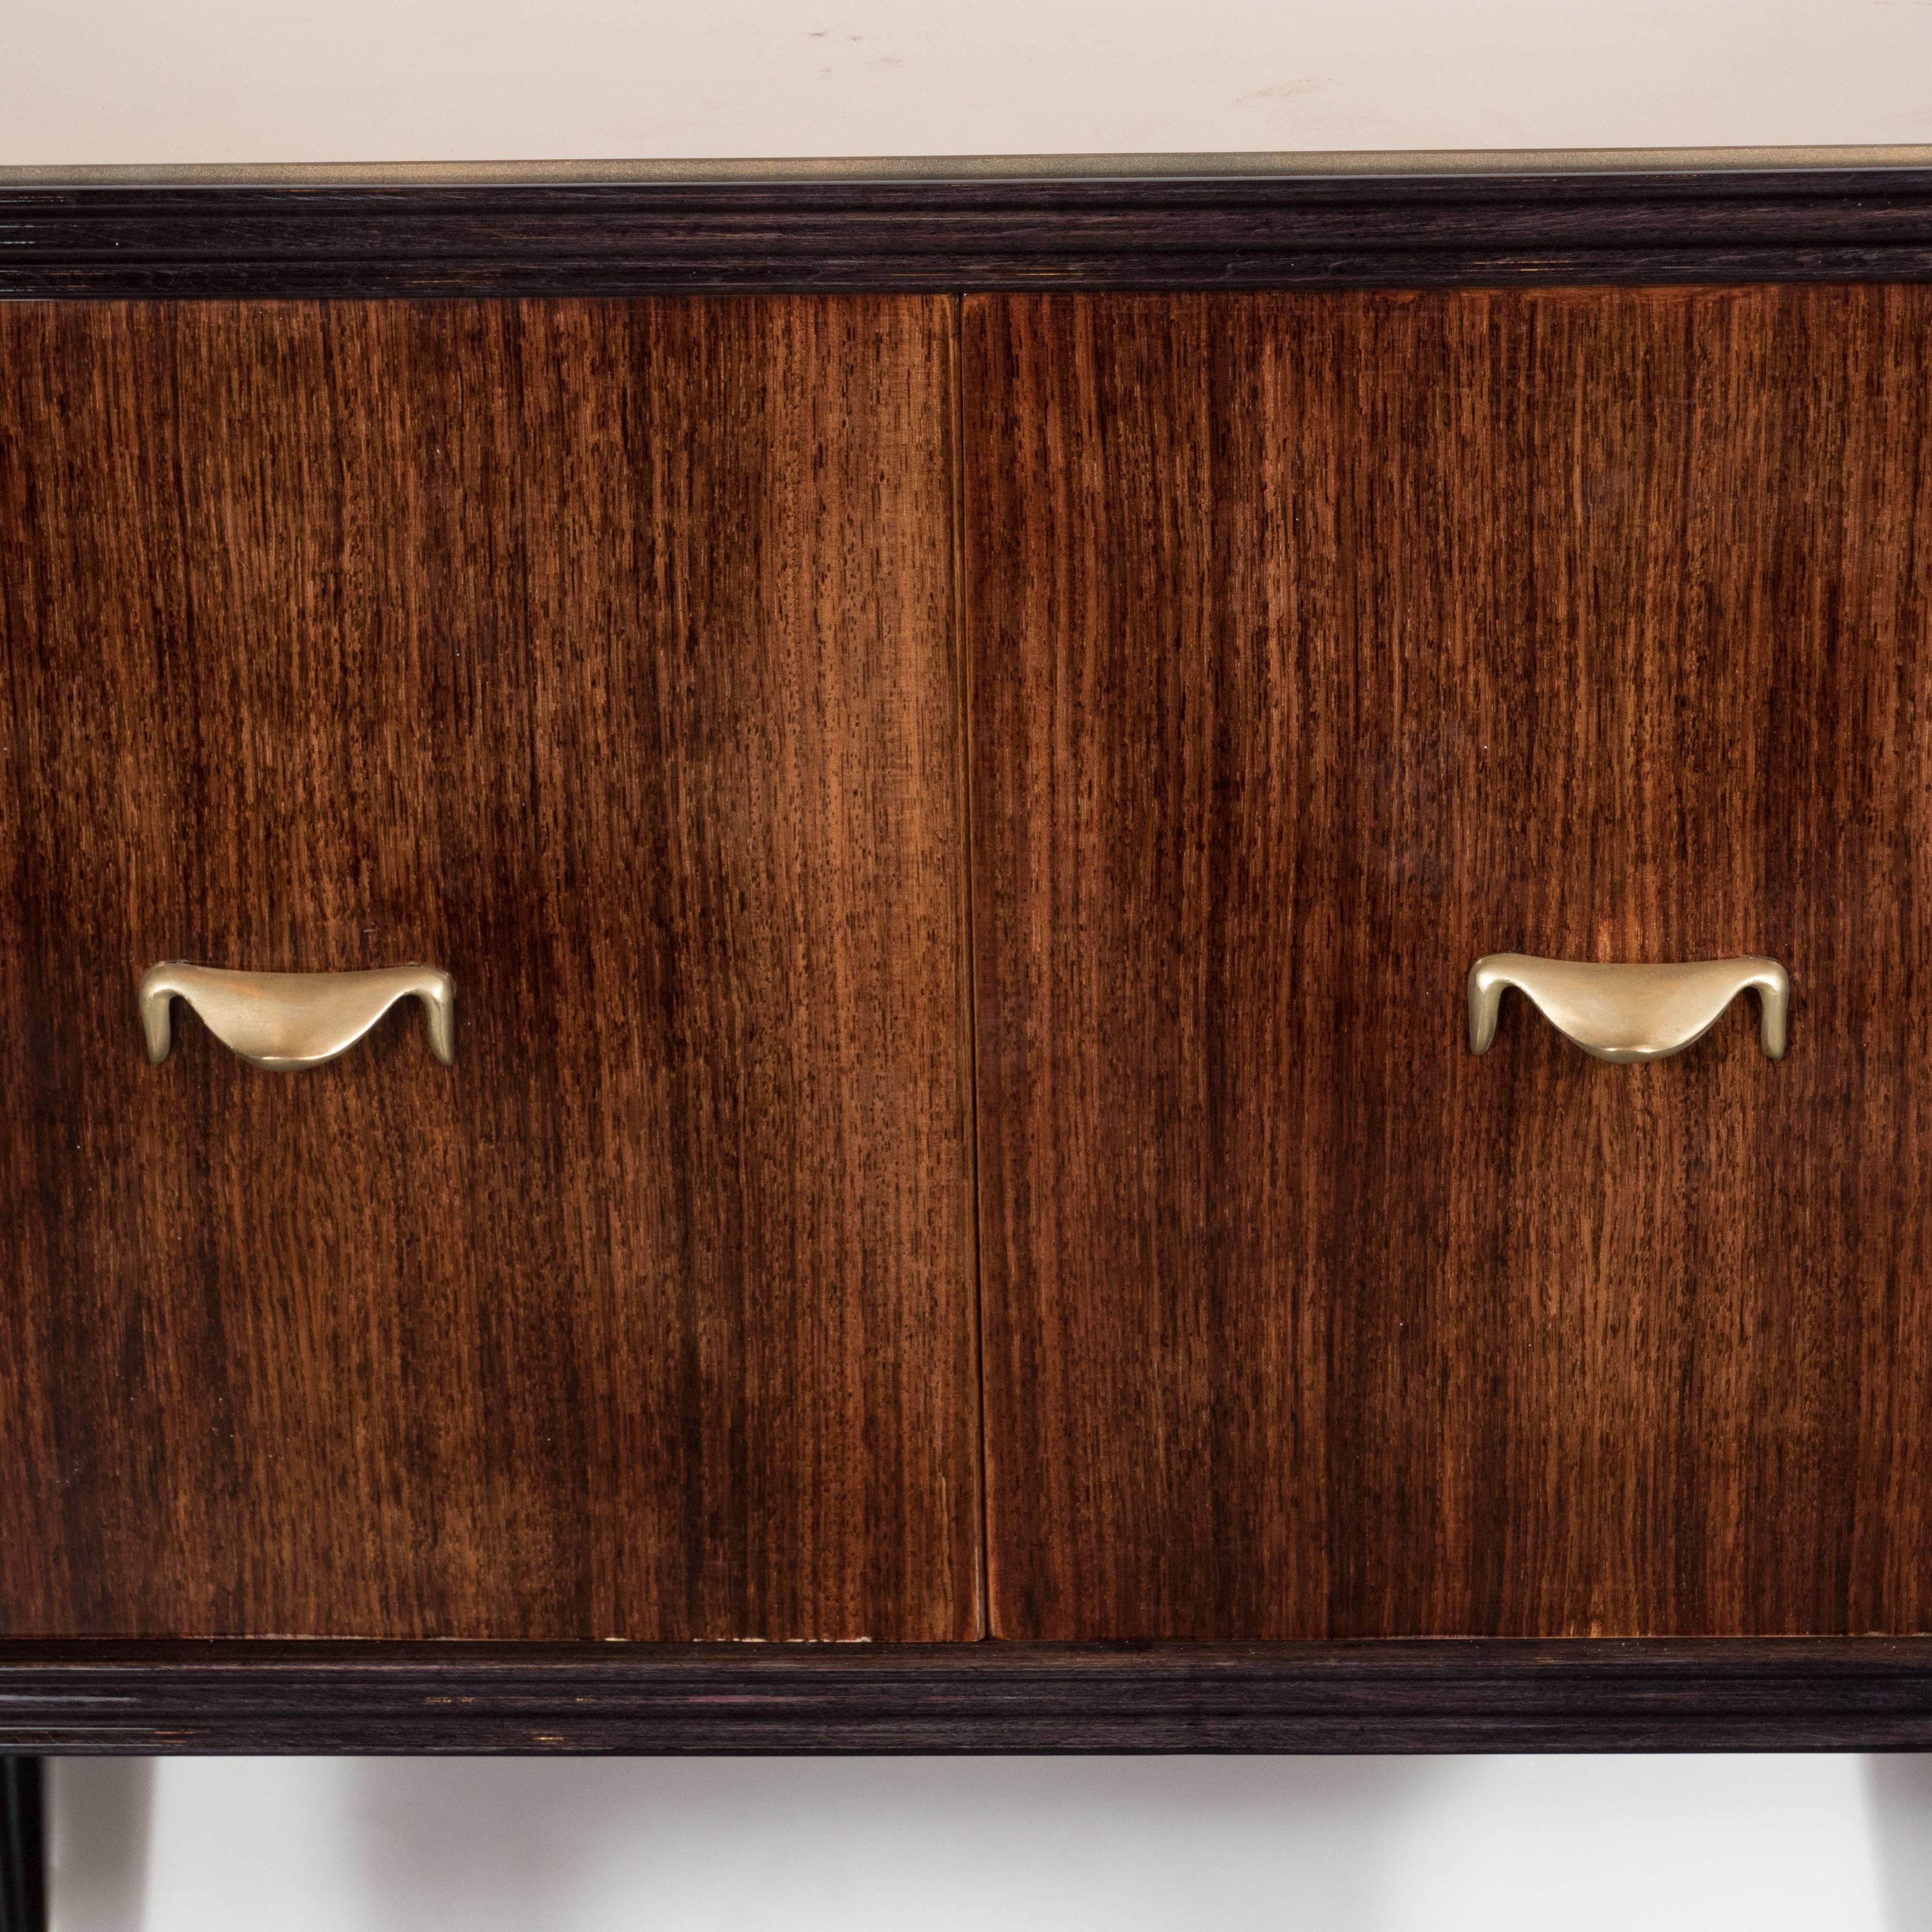 Mid-20th Century Pair of Mid-Century Modernist Nightstands or End Tables in Rosewood and Gilt